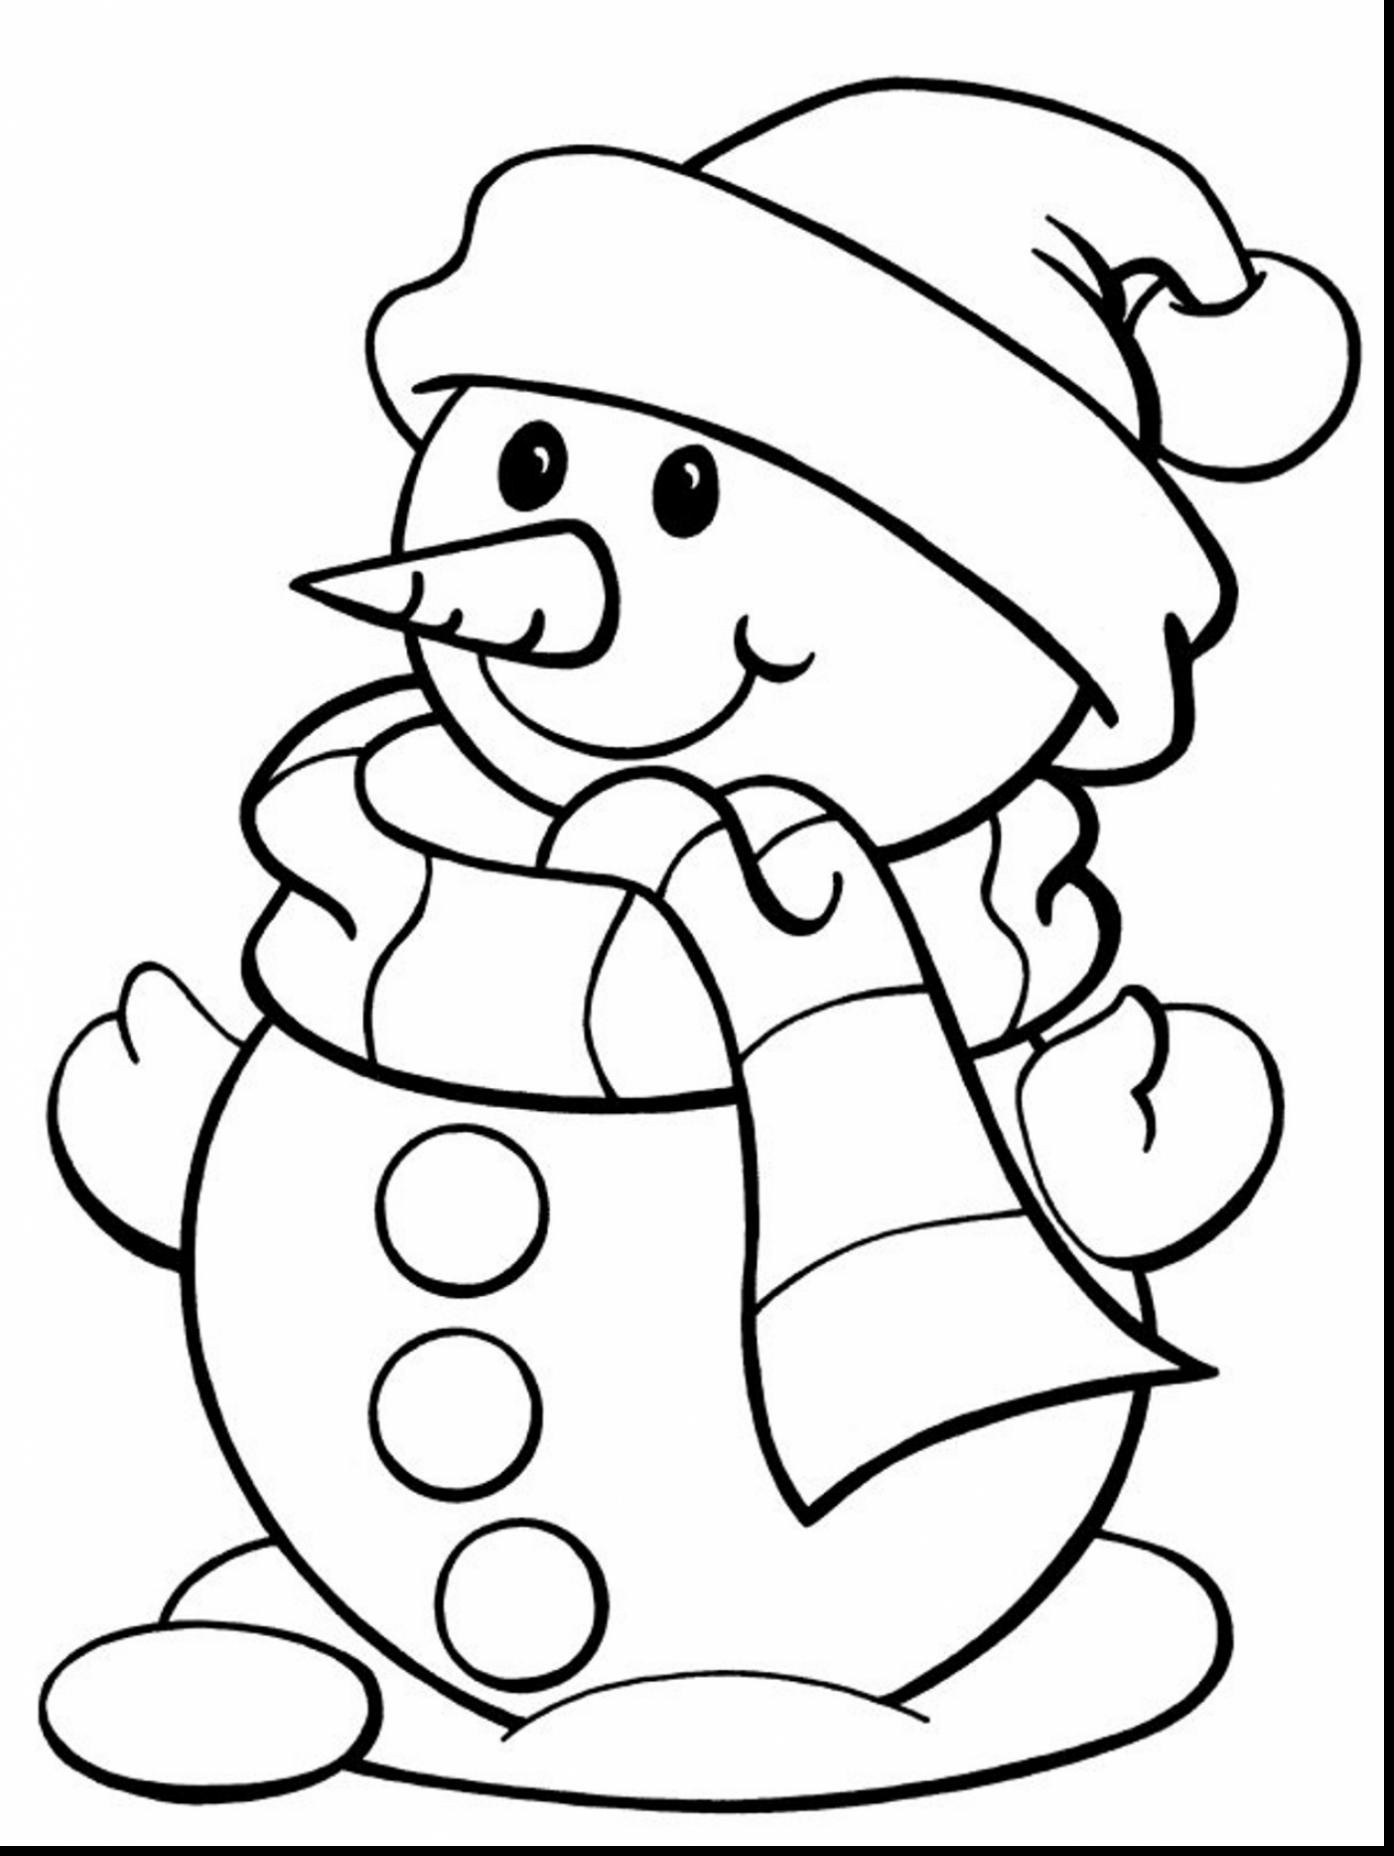 Printable Winter Wonderland Coloring Pages at Free